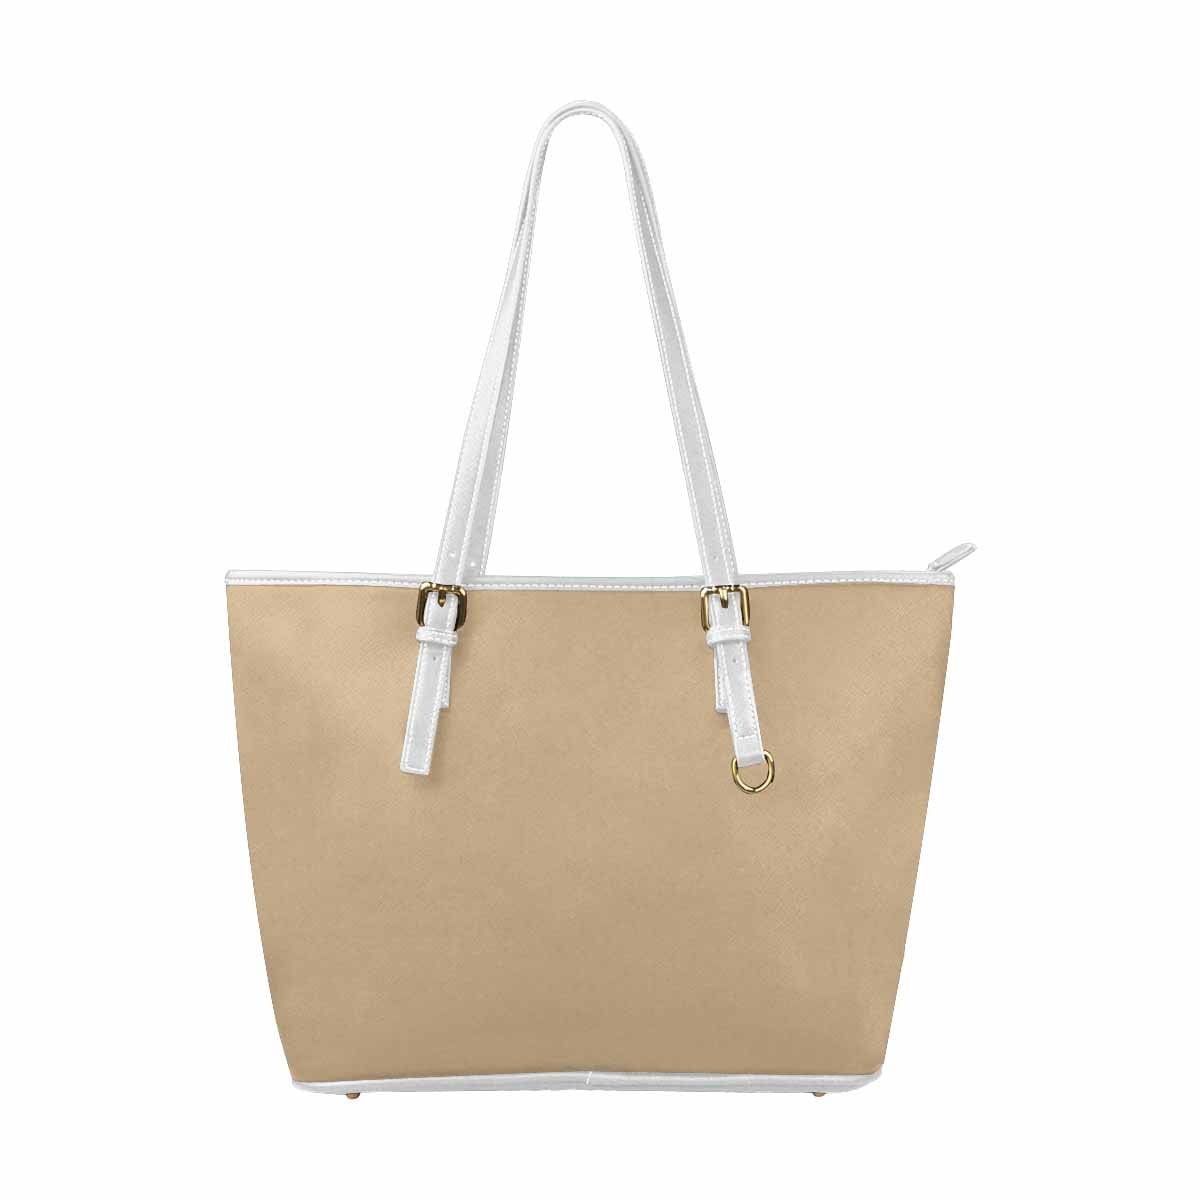 Tan Brown - Large Leather Tote Bag with Zipper by inQue.Style